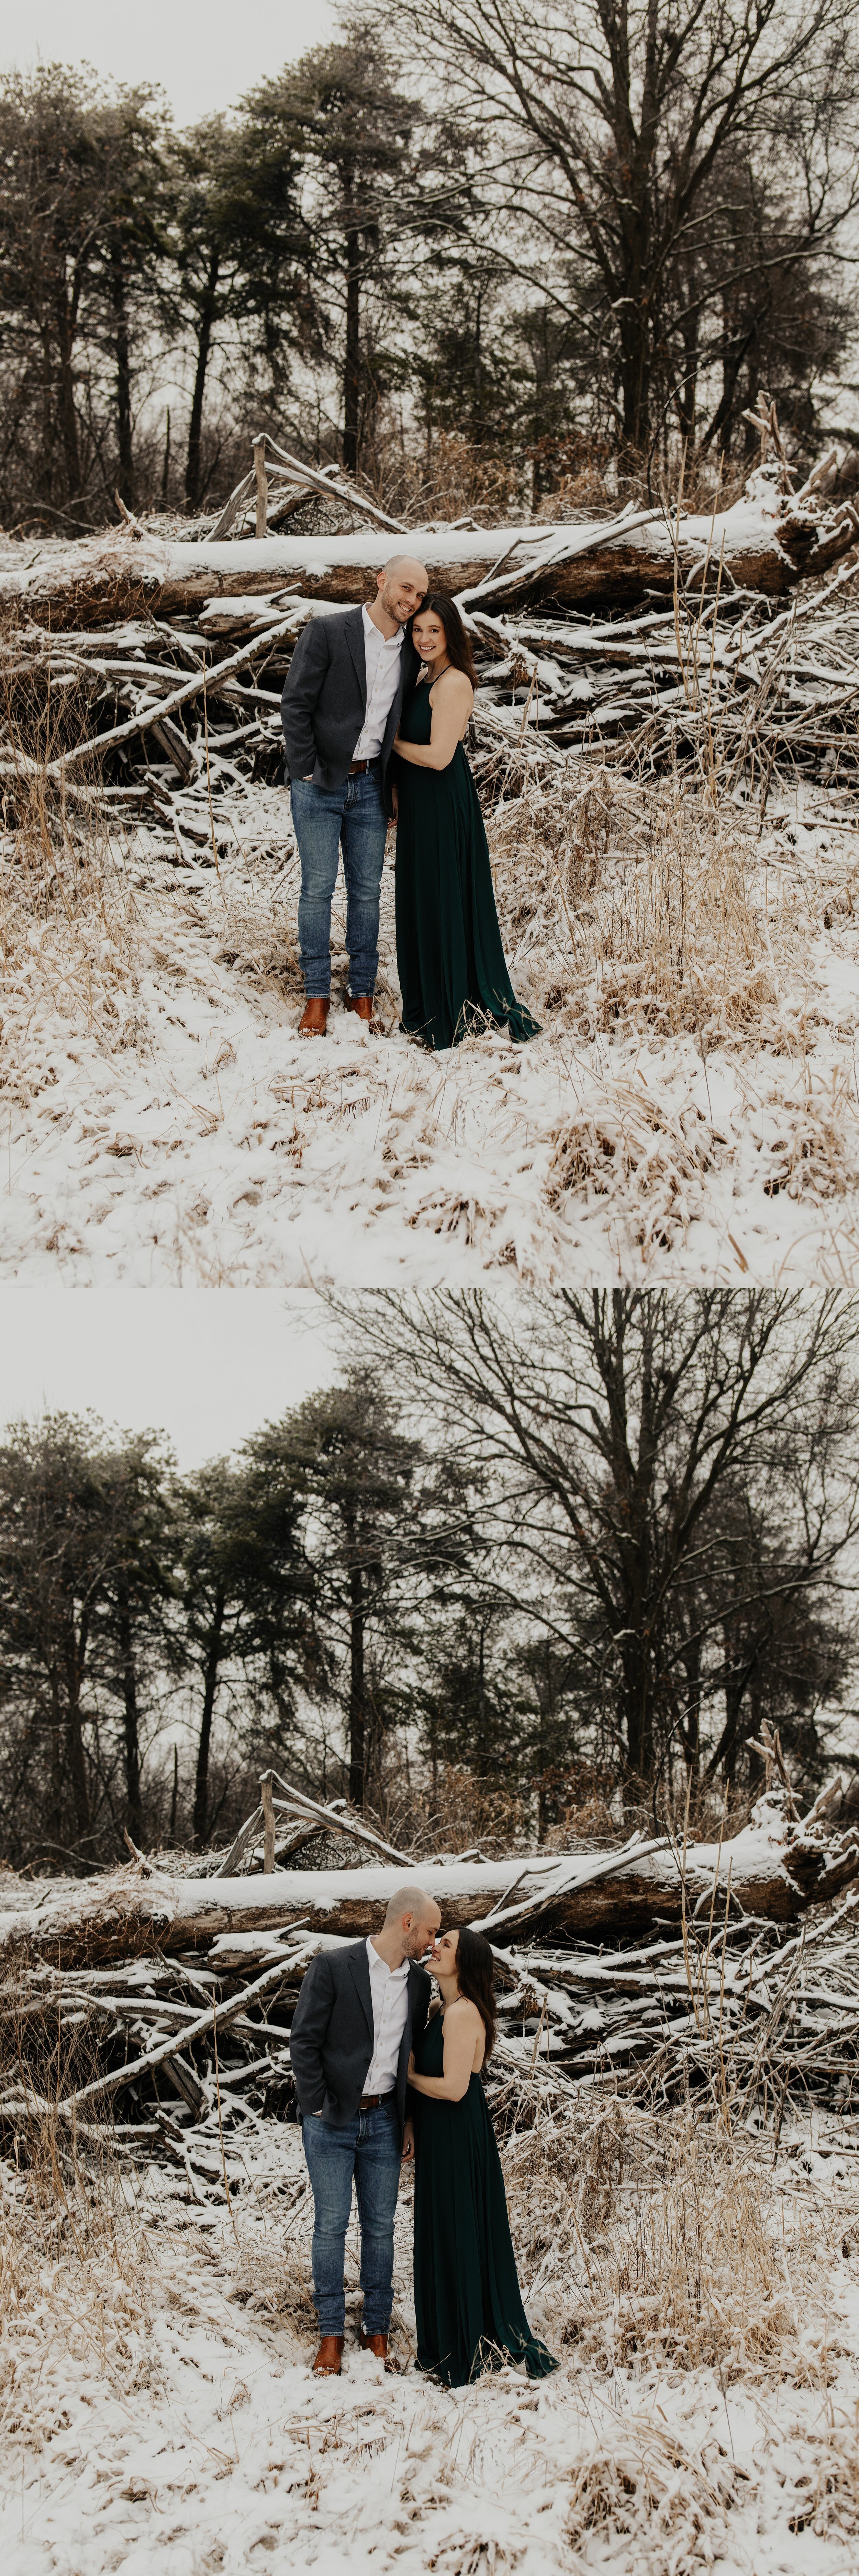 jessika-christine-photography-outdoor-engagement-couples-snow-adventurous-session.jpg